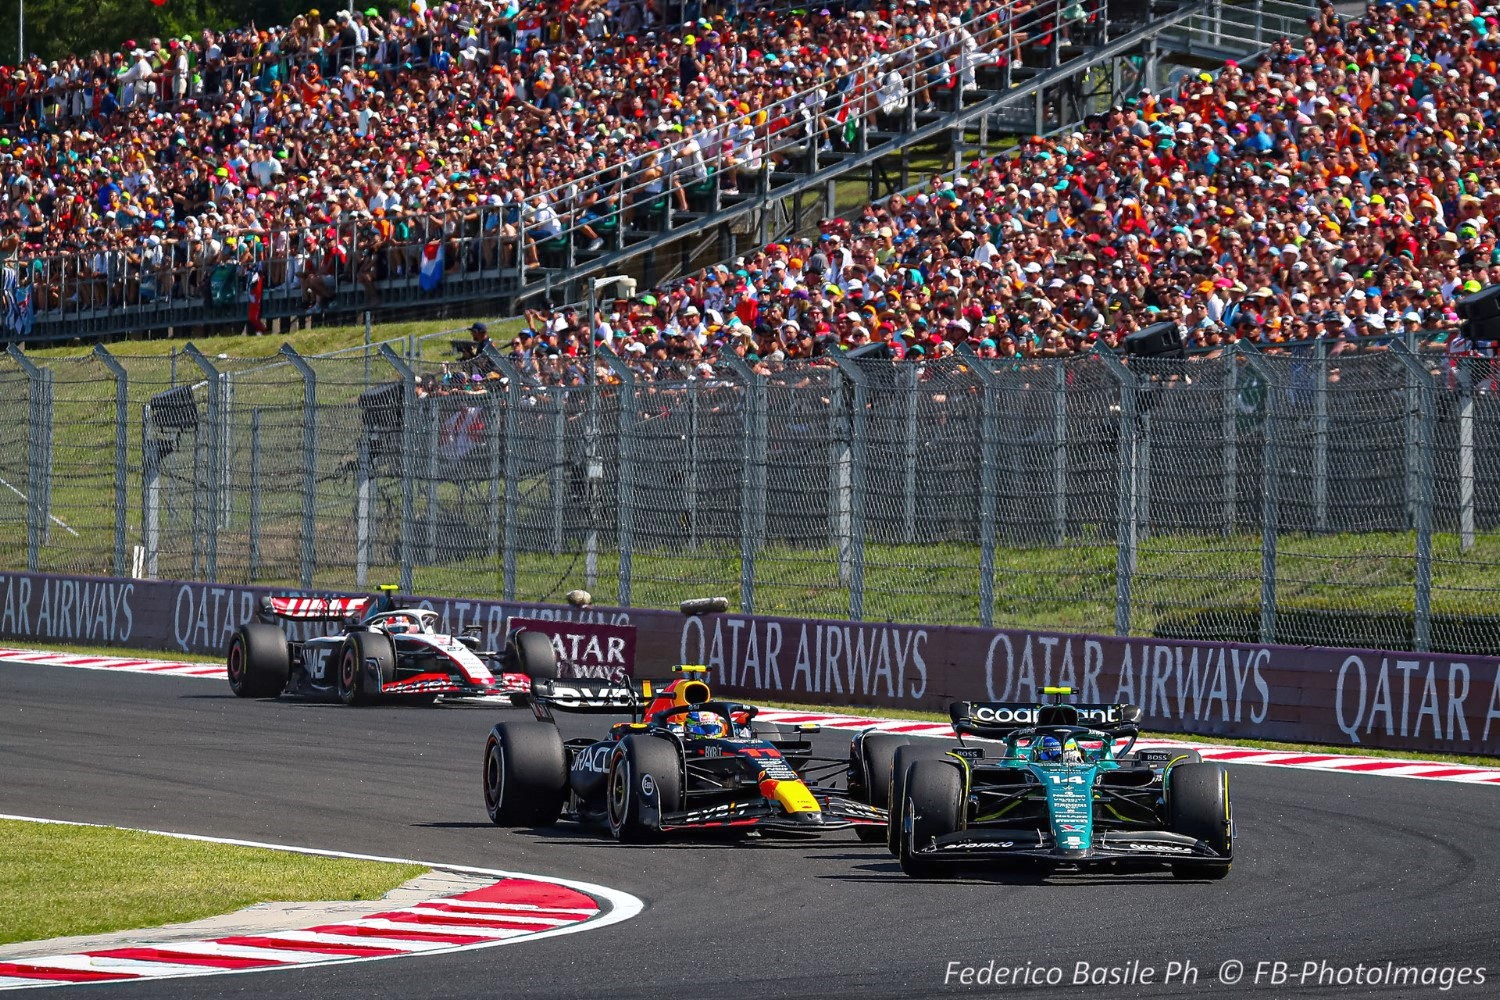 F1 USA TV audience up 123.8% in 5 years